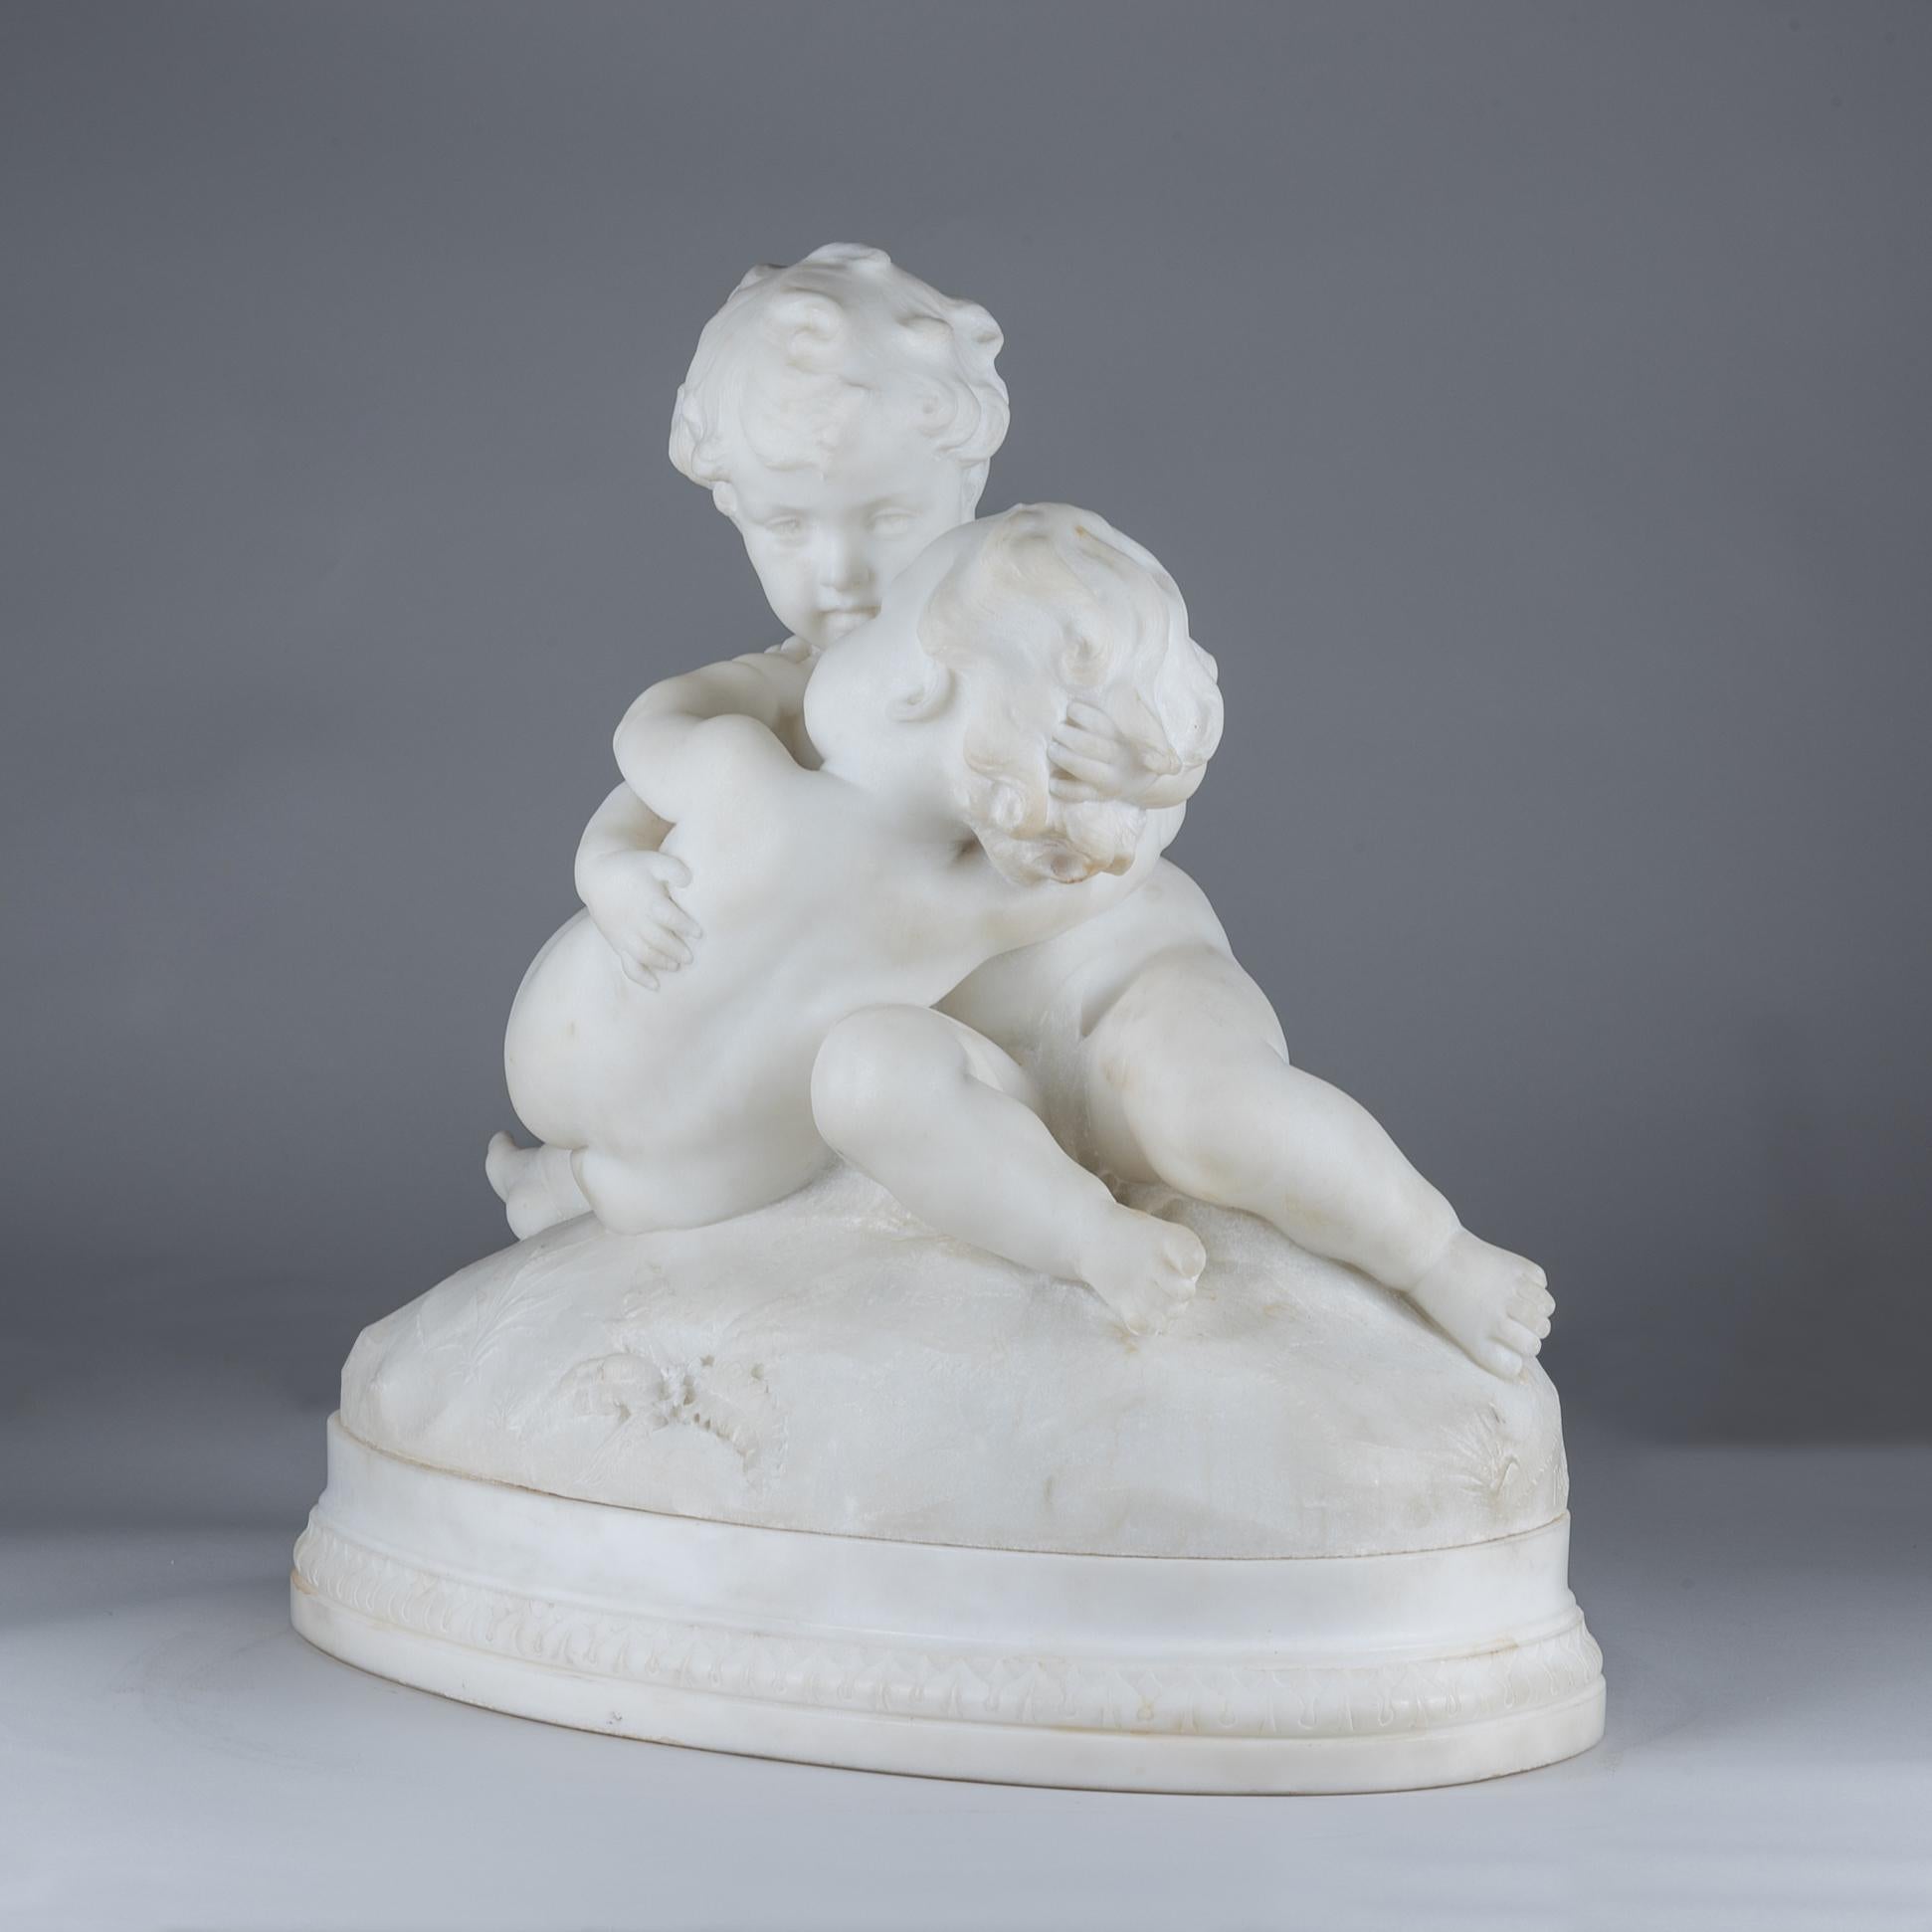 Carved Italian White Marble Sculpture of Two Cherubs Embracing by Puji